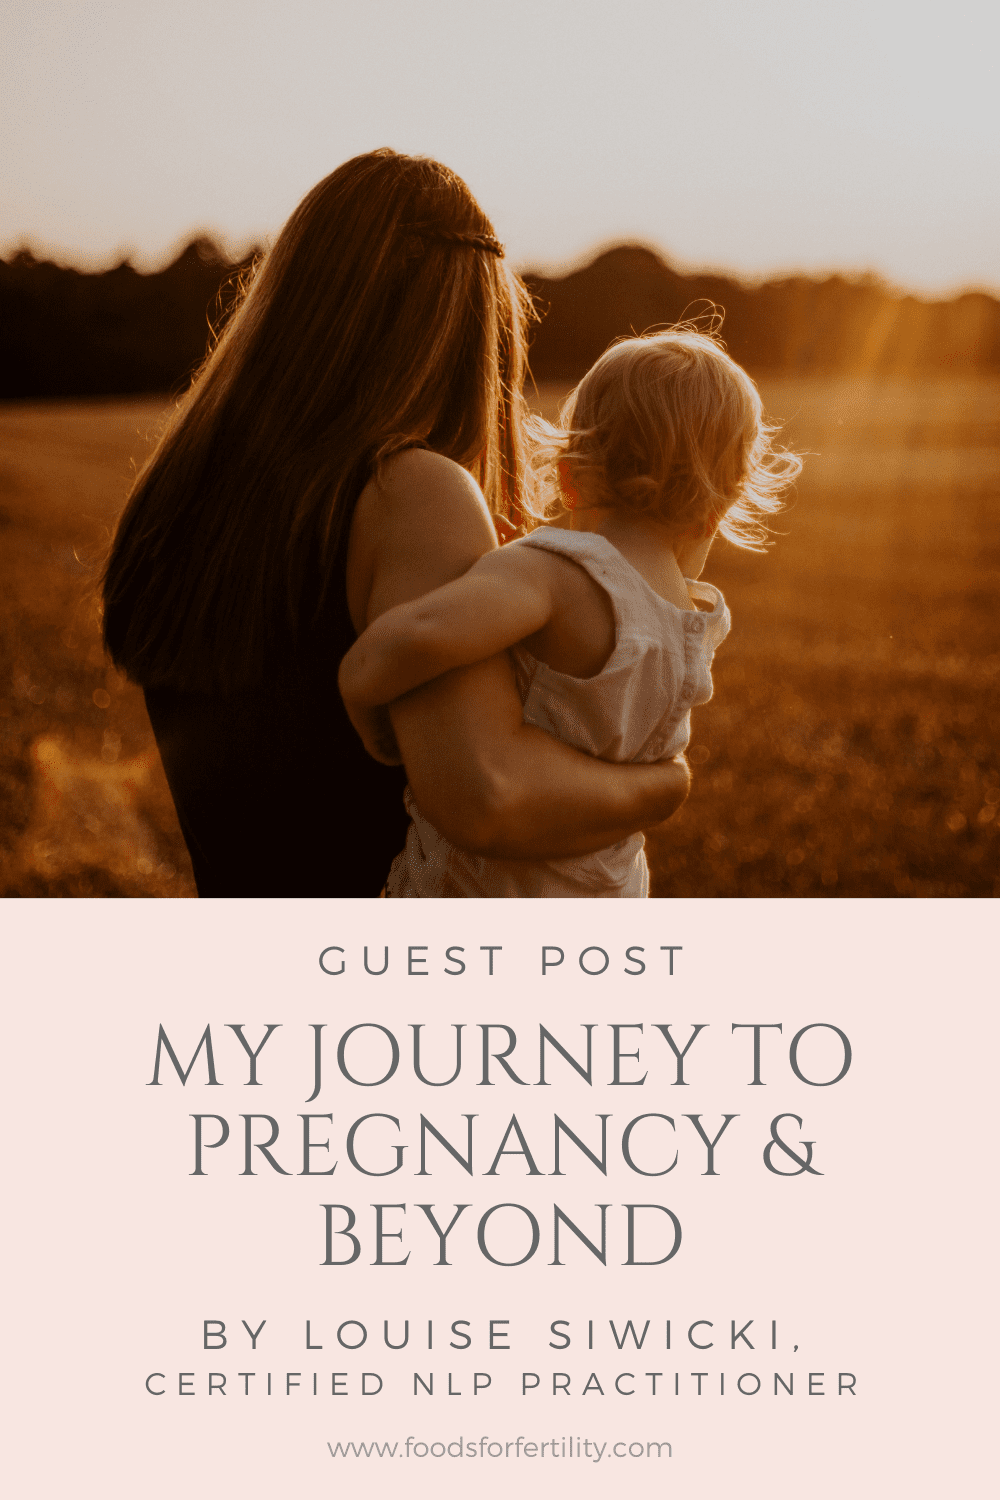 Louise Siwicki – My Journey to Pregnancy and Beyond